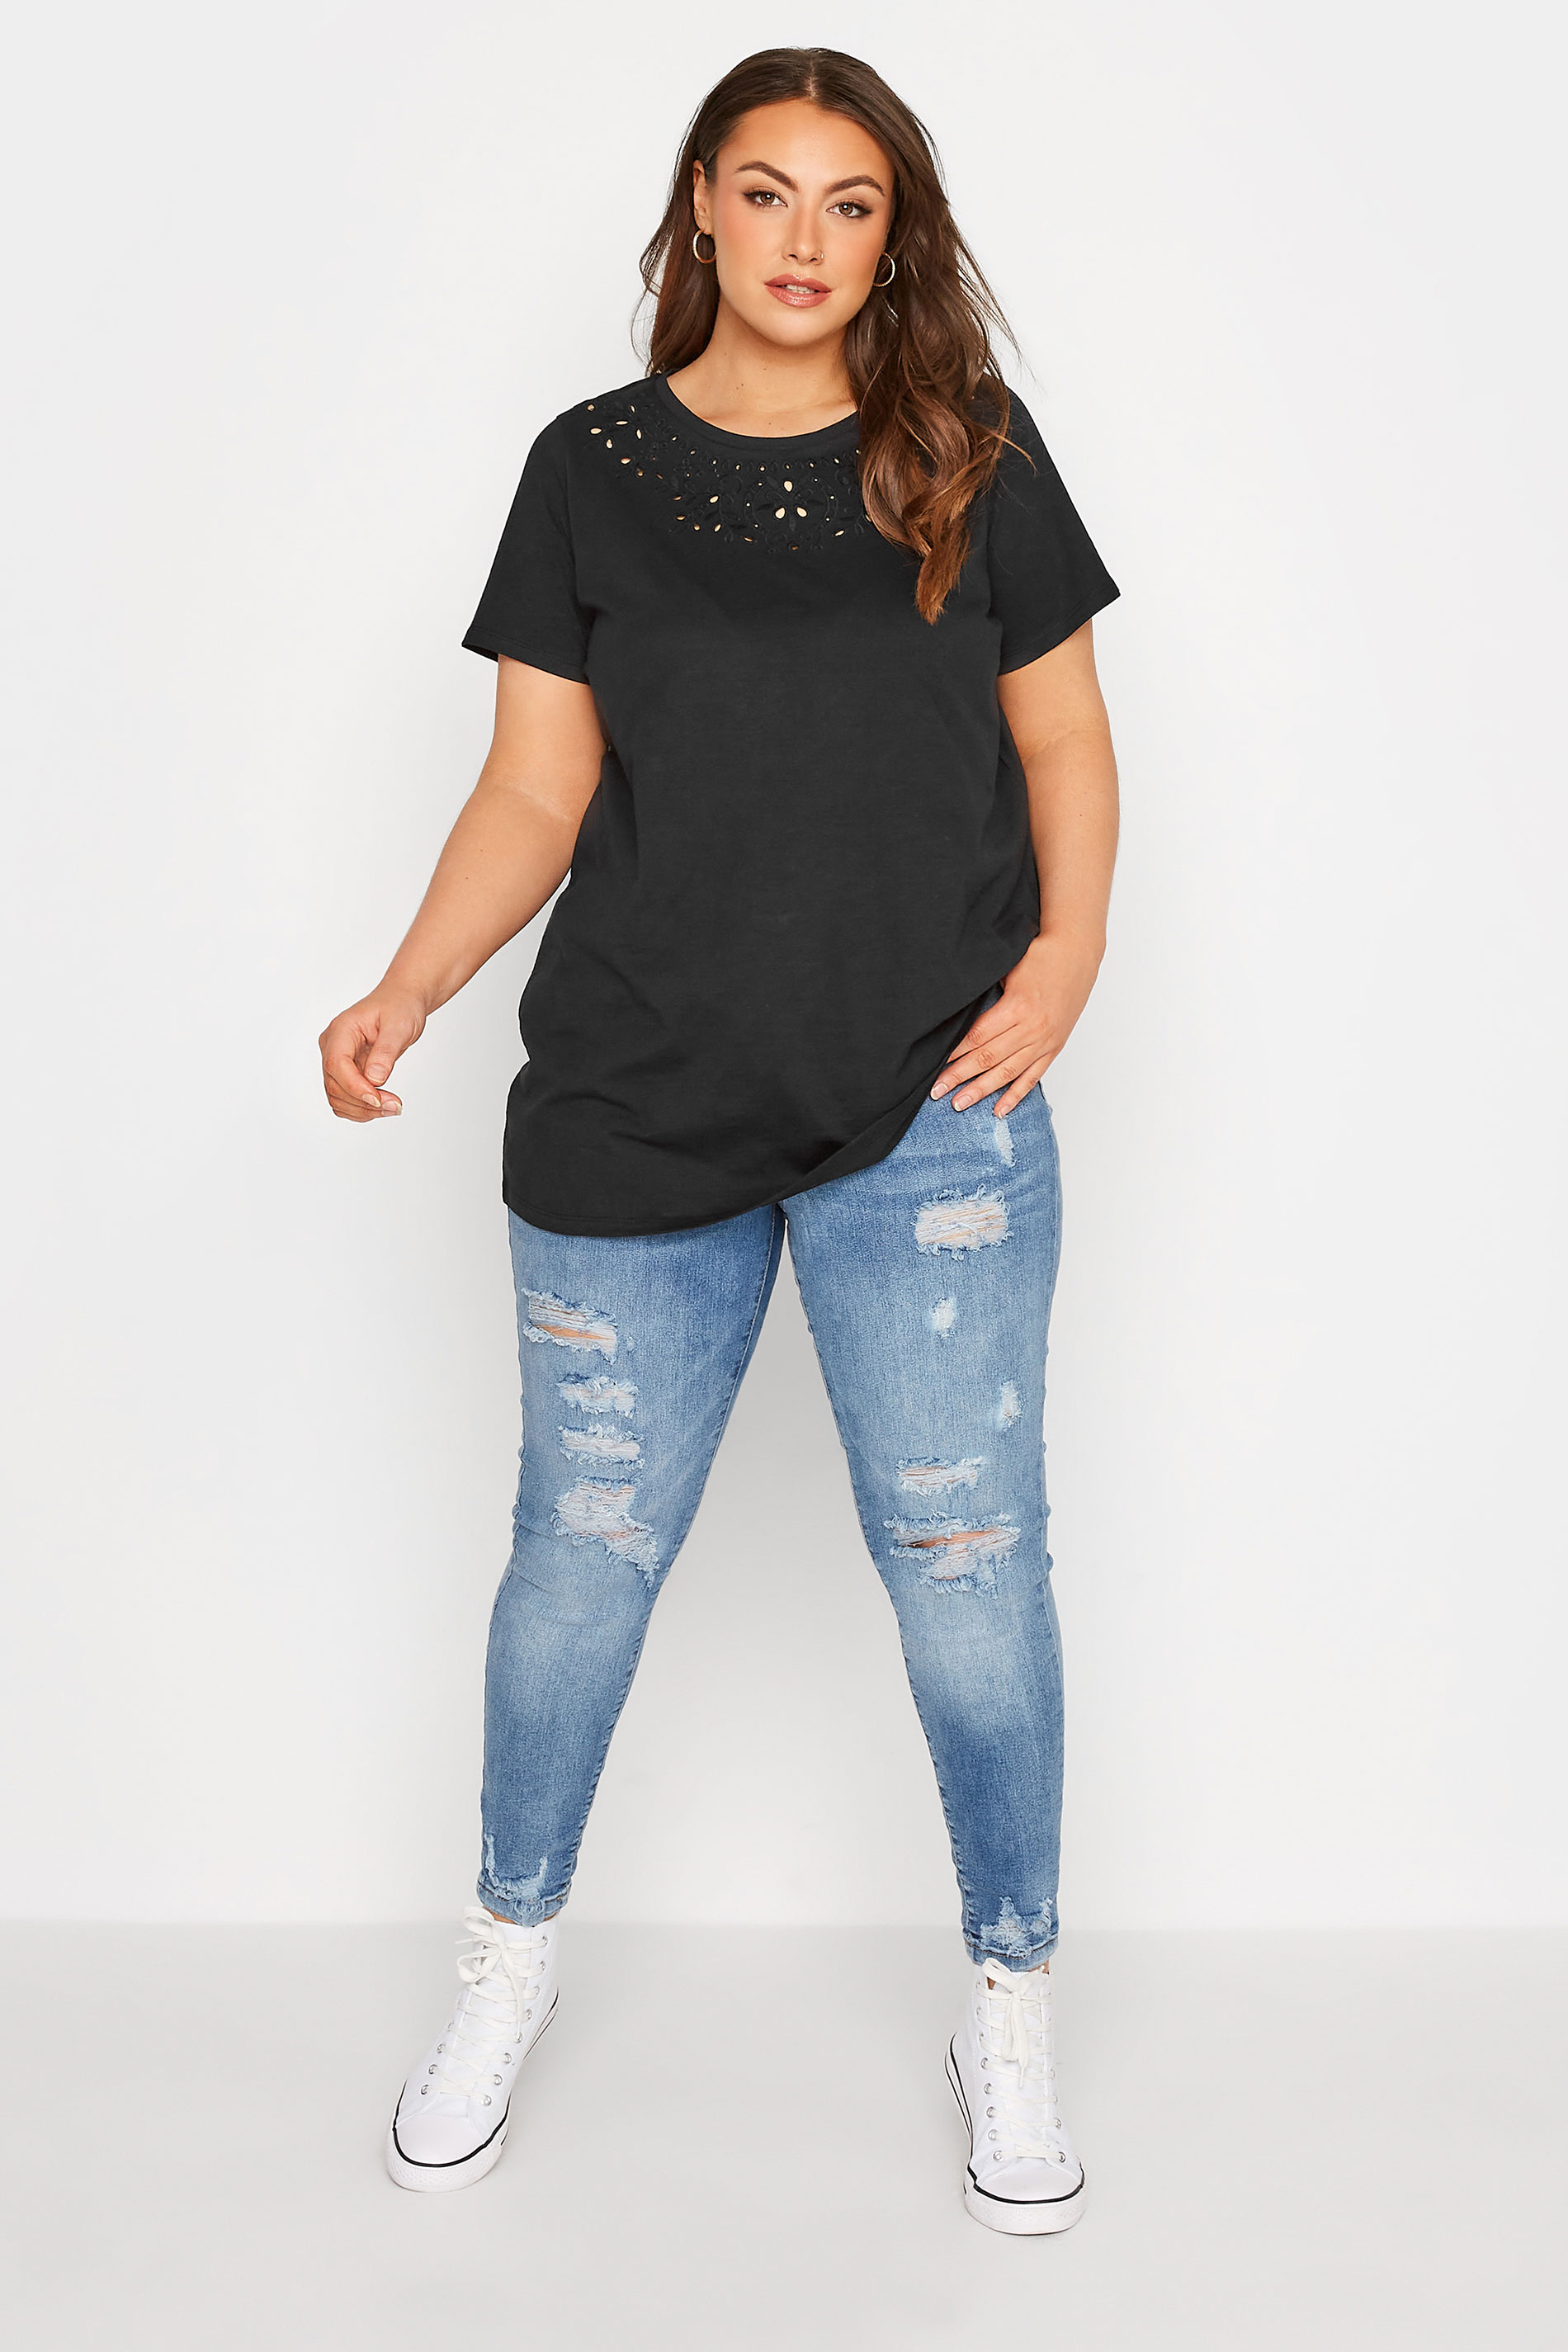 Grande taille  Tops Grande taille  Tops Casual | Top Noir Manches Courtes Broderie Anglaise - CA39914